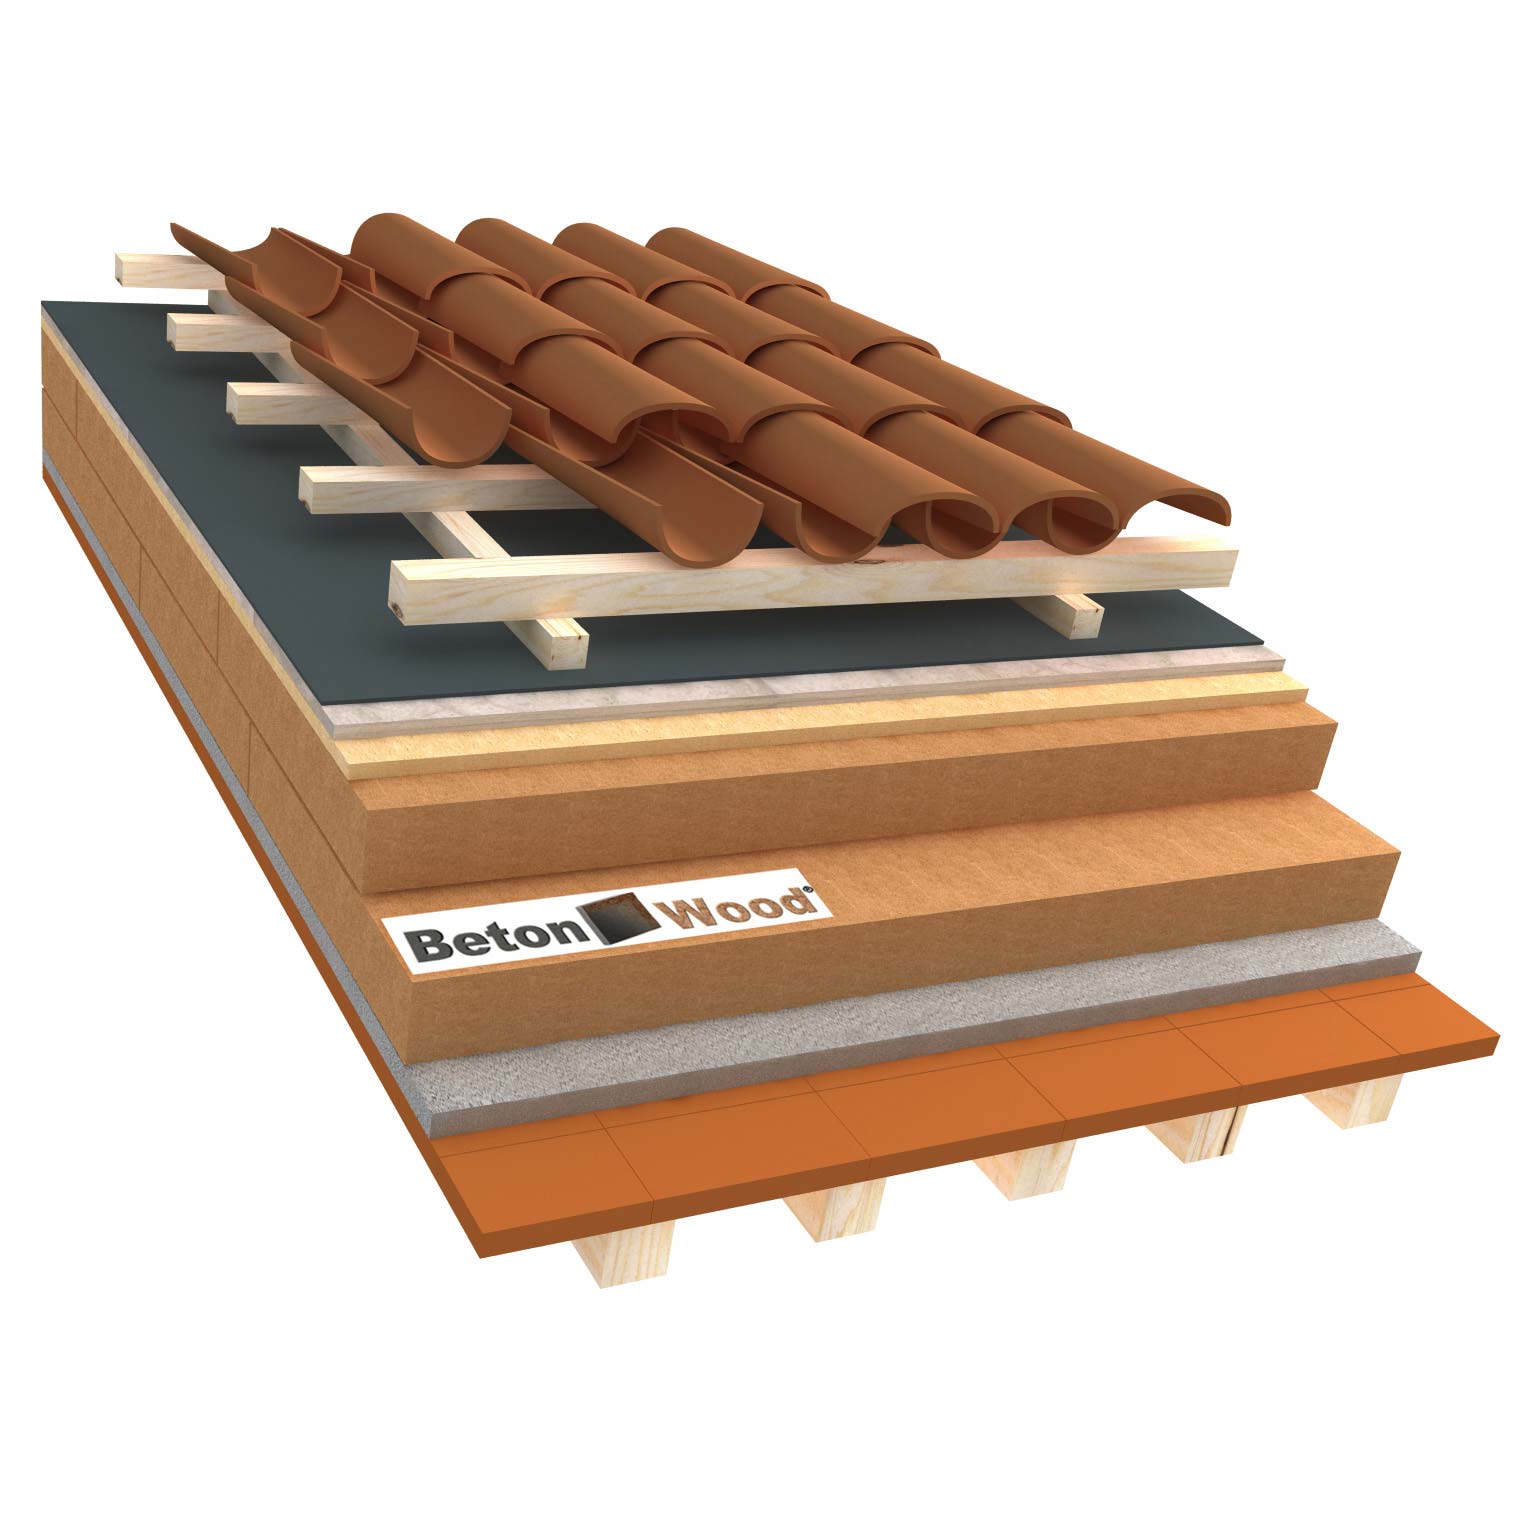 Ventilated roof with fiber wood Isorel, Universal dry and cement bonded particle boards on terracotta tiles